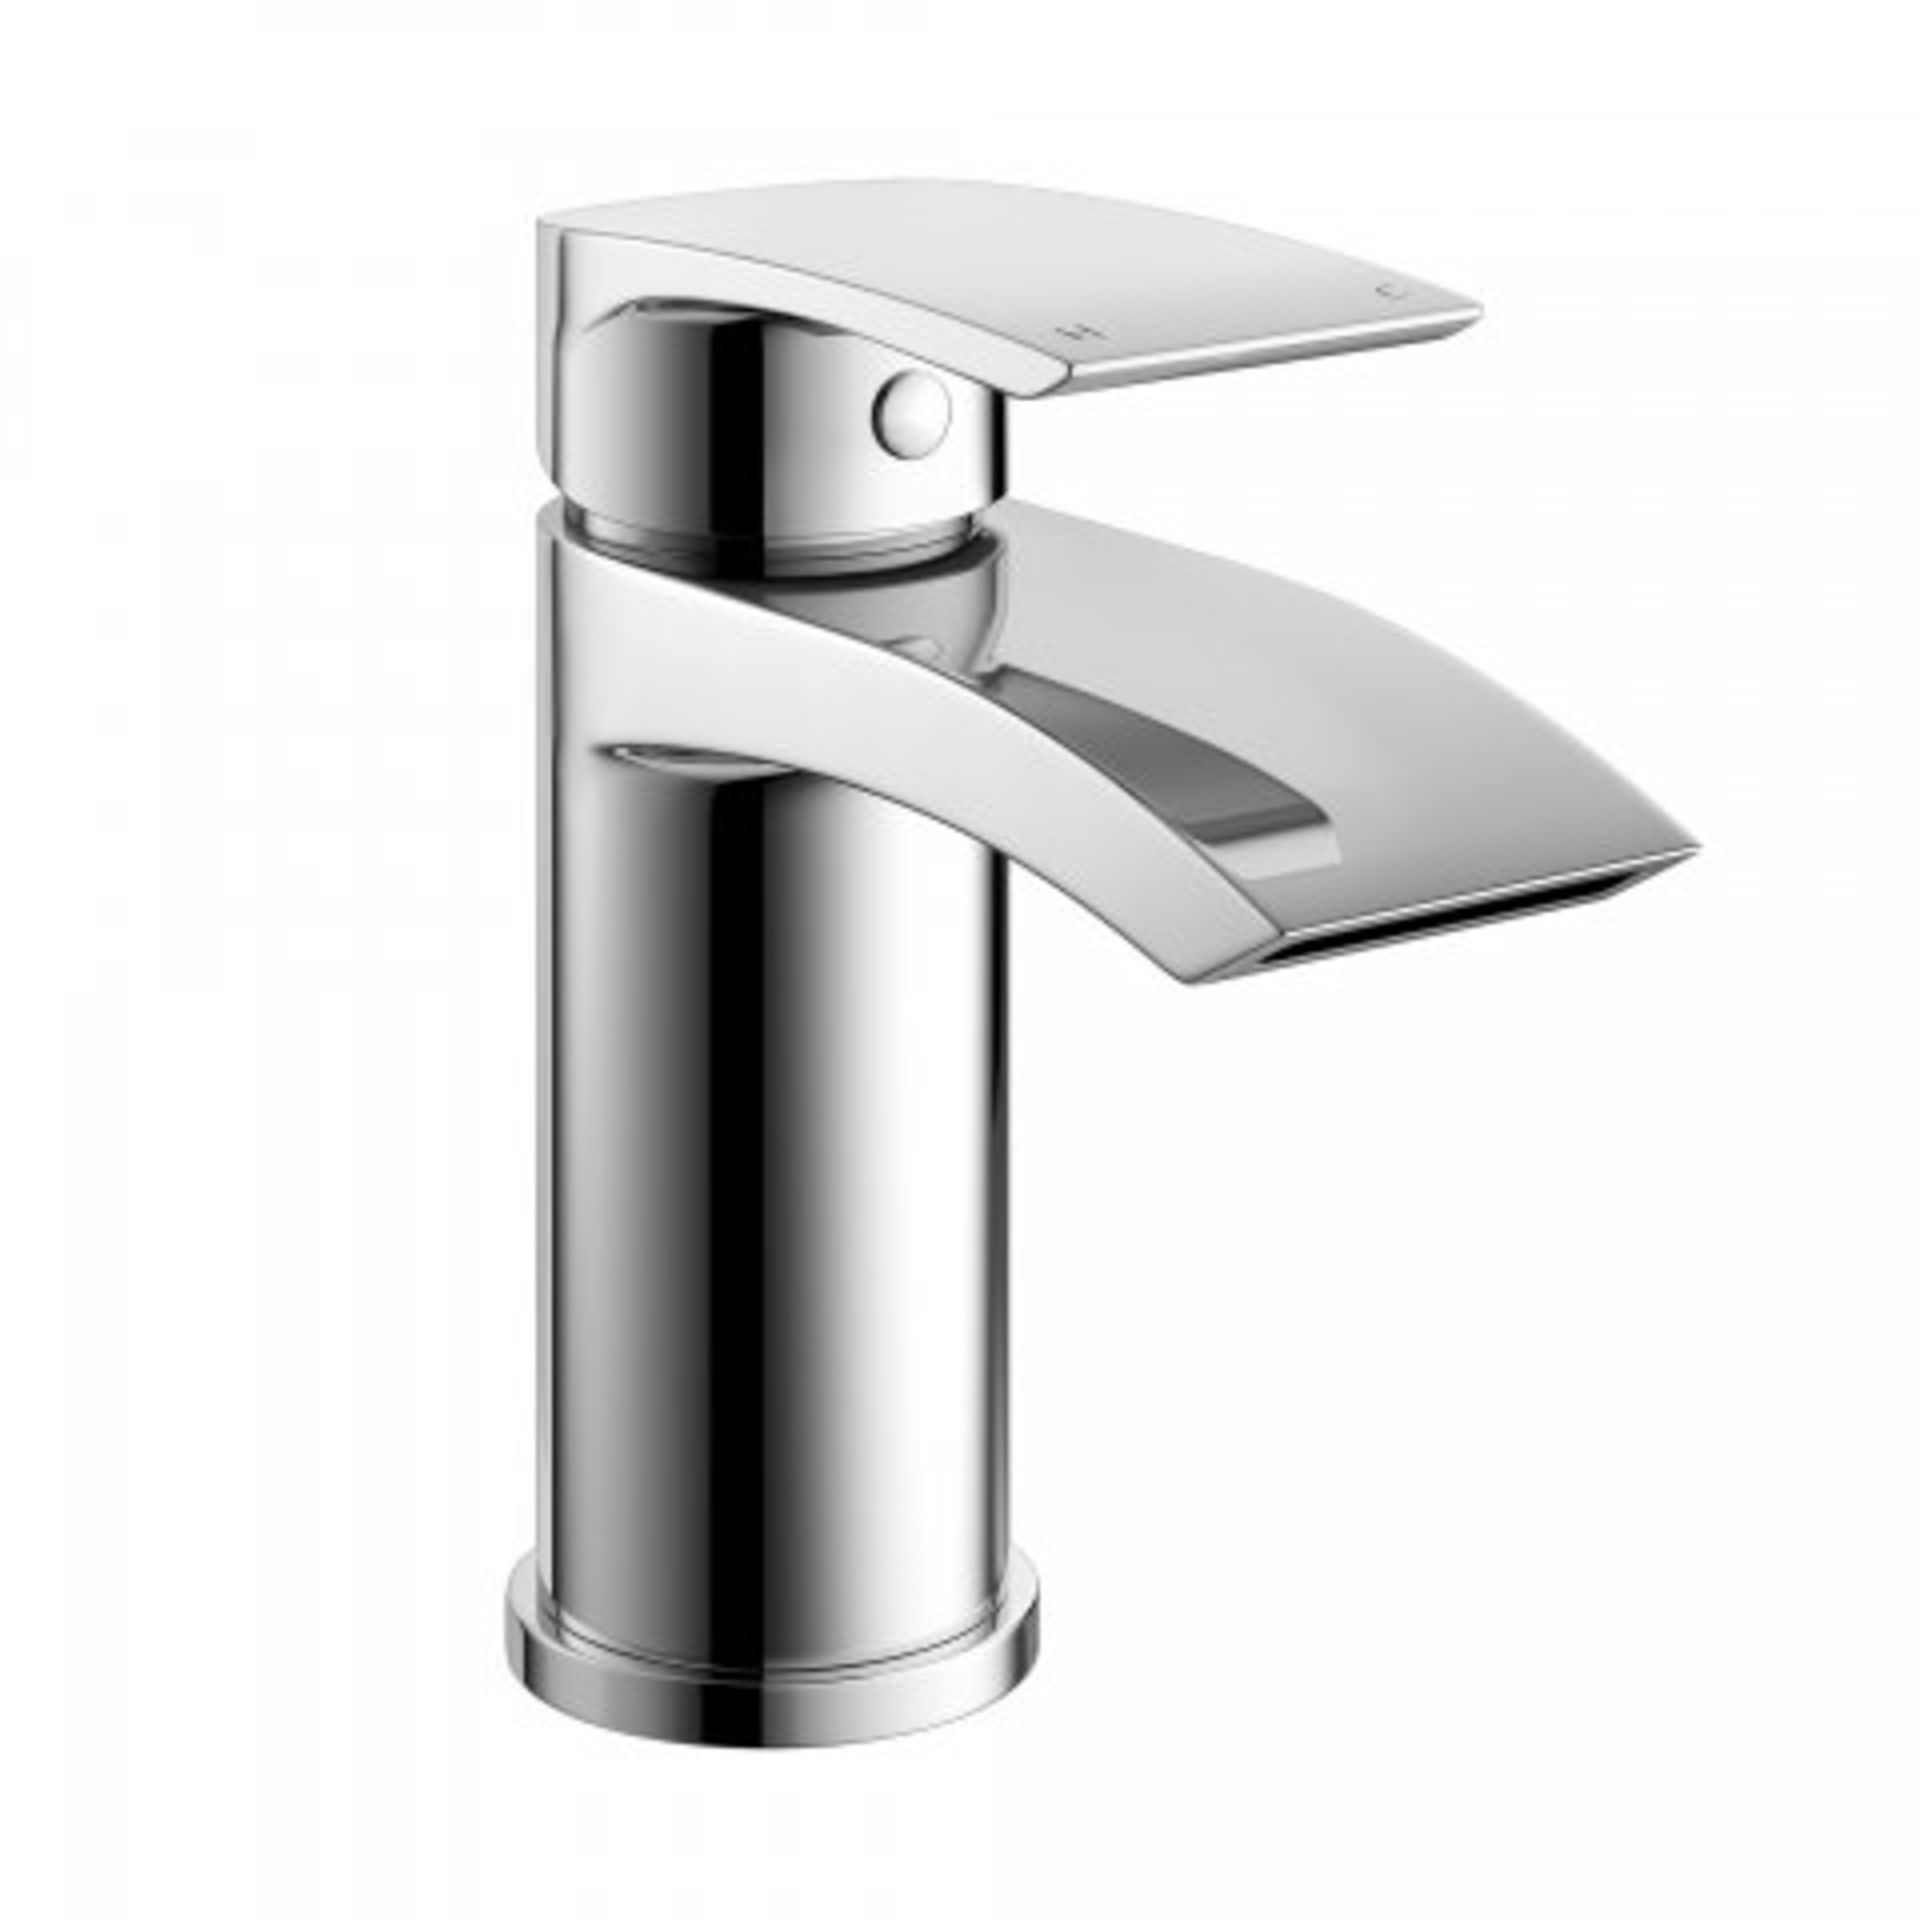 (I200) Avon Mono Basin Mixer Tap Assured Performance Maintenance free technology is incorporated - Image 2 of 2